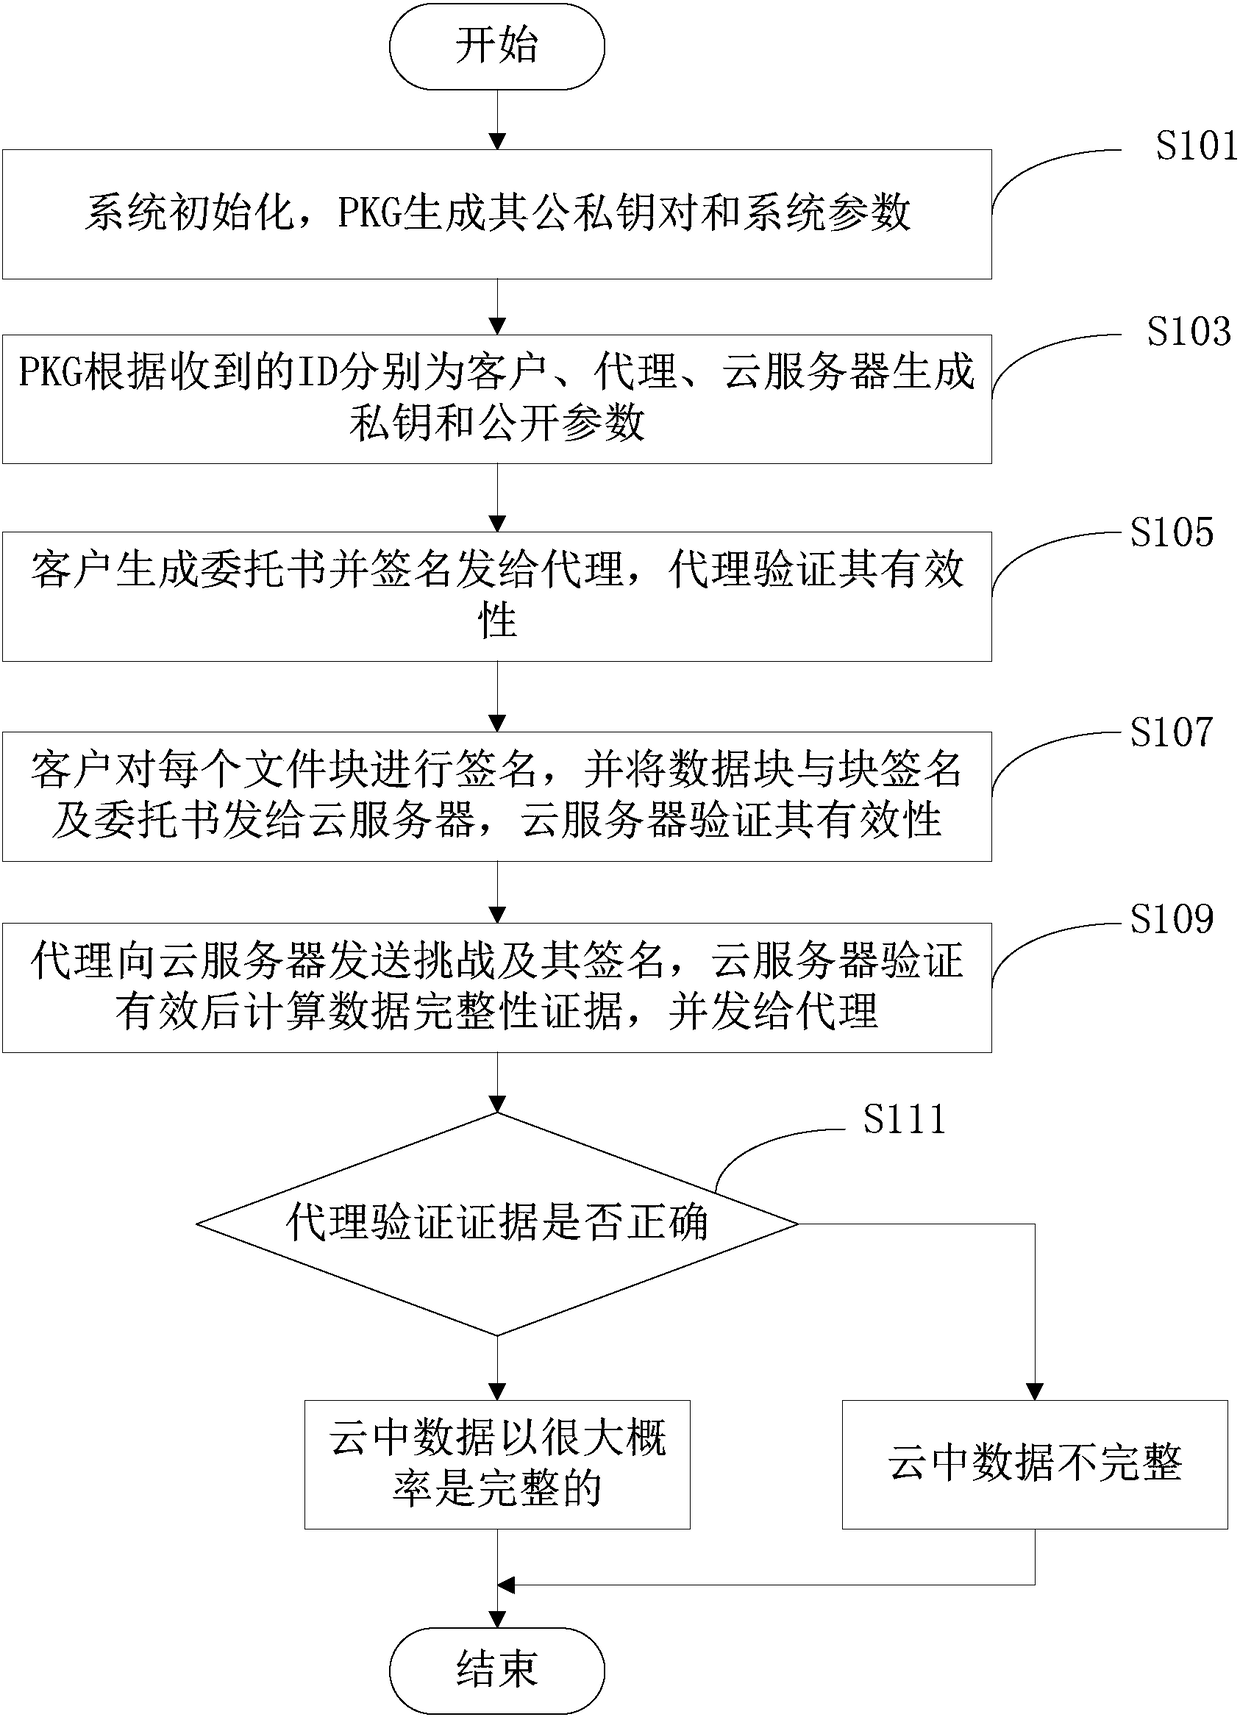 Proxy data integrity detection method based on identities in cloud storage